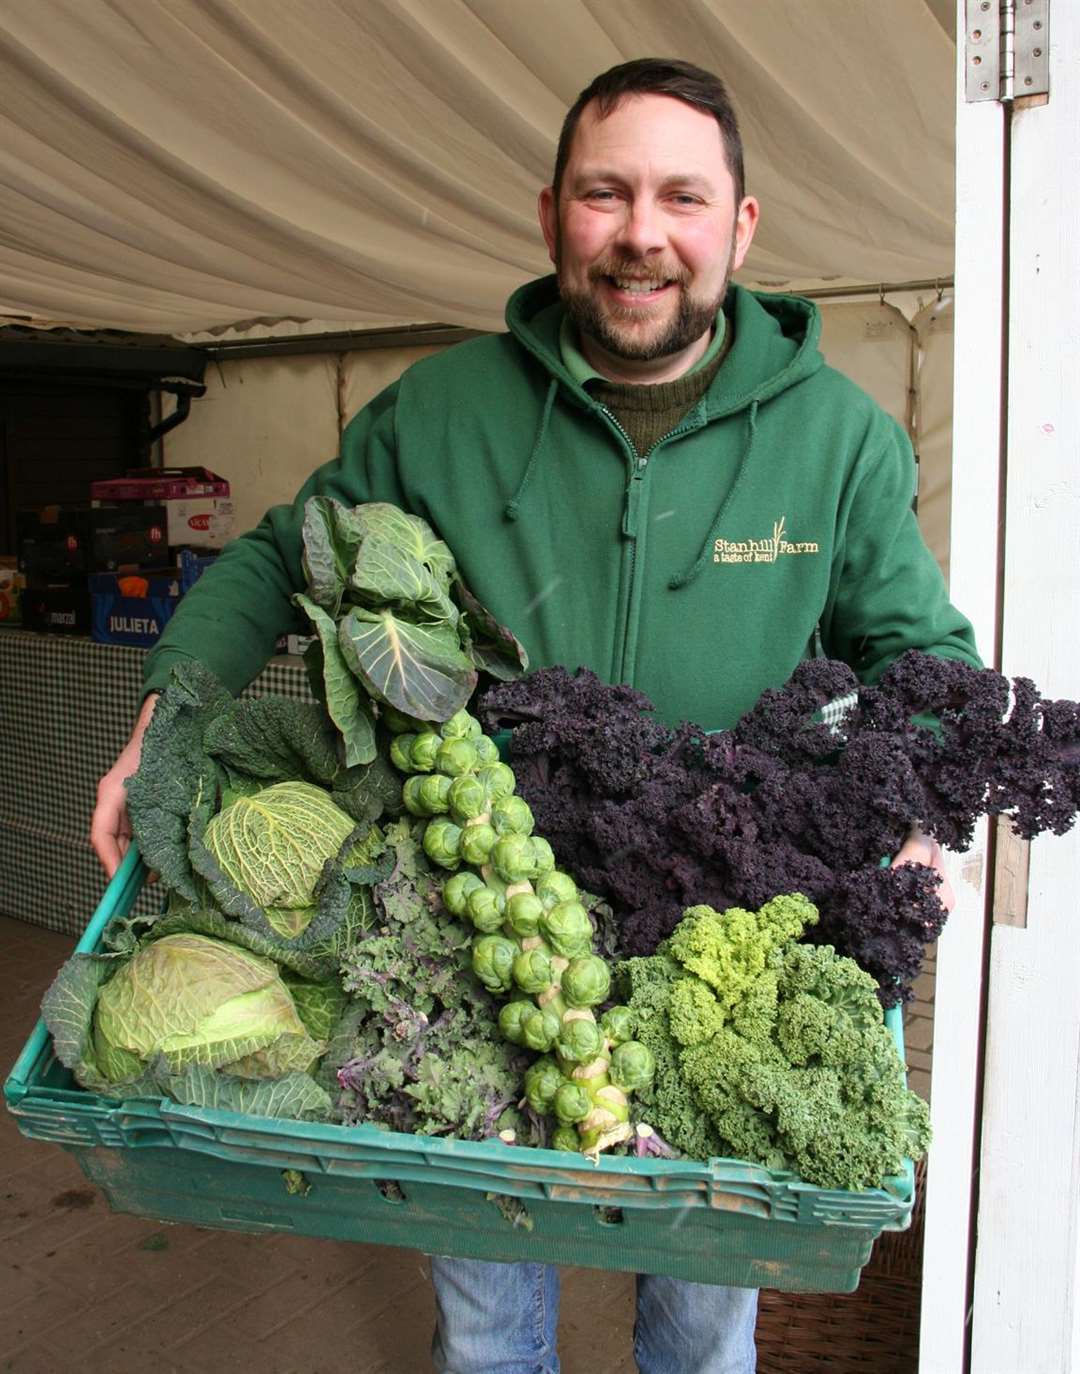 Farmer and grower Toby Williams of Stanhill Farm in Wilmington is the chairman of Kent NFU